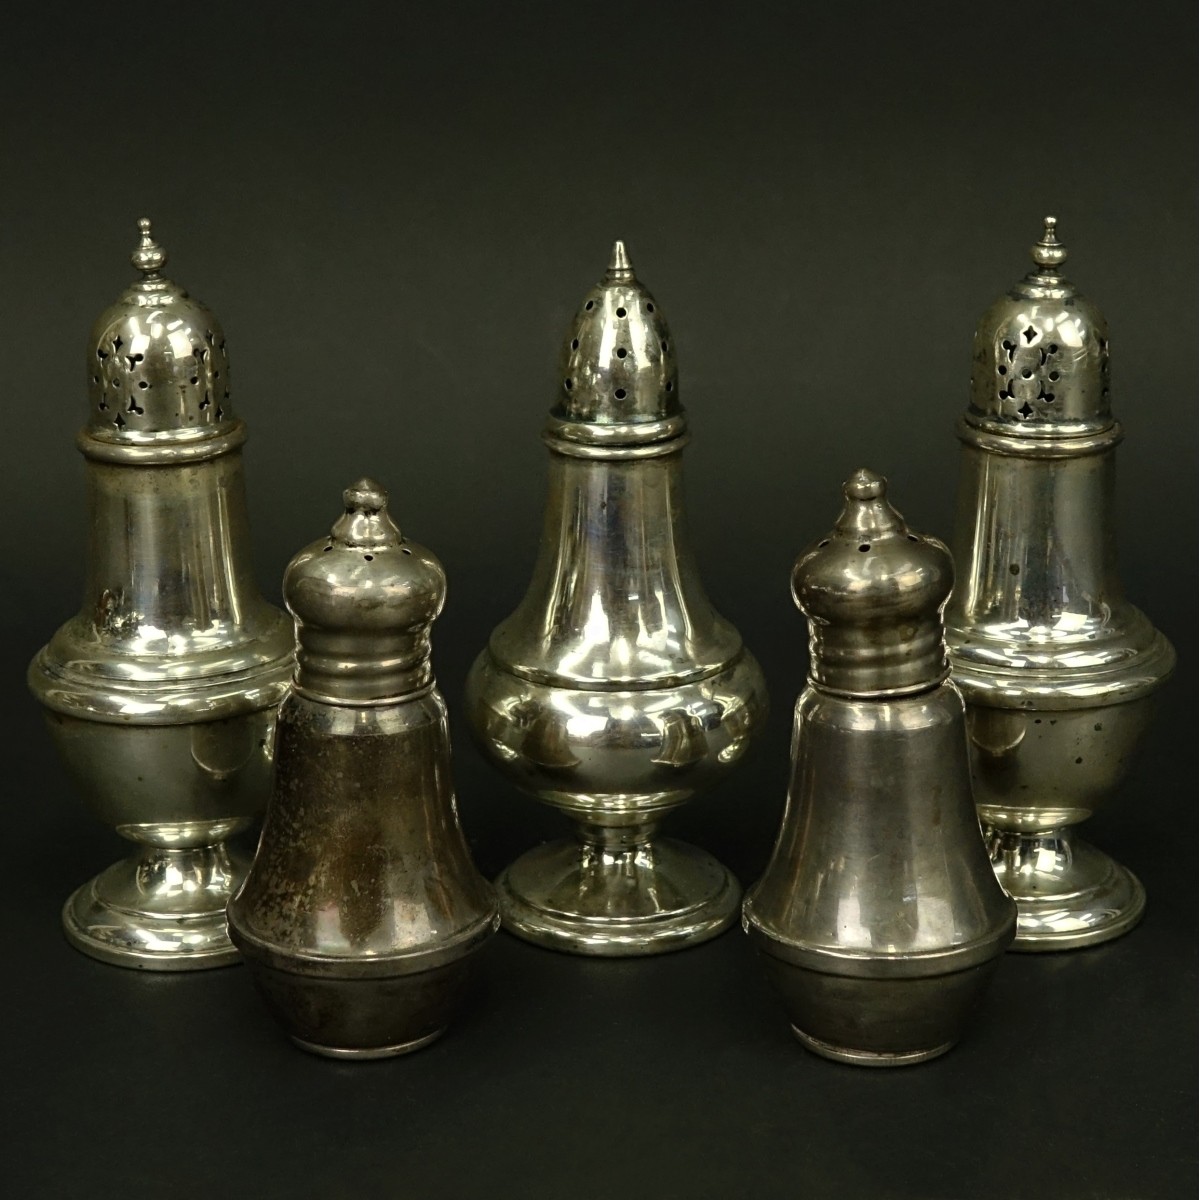 Collection of 5 Sterling Salt & Pepper Shakers